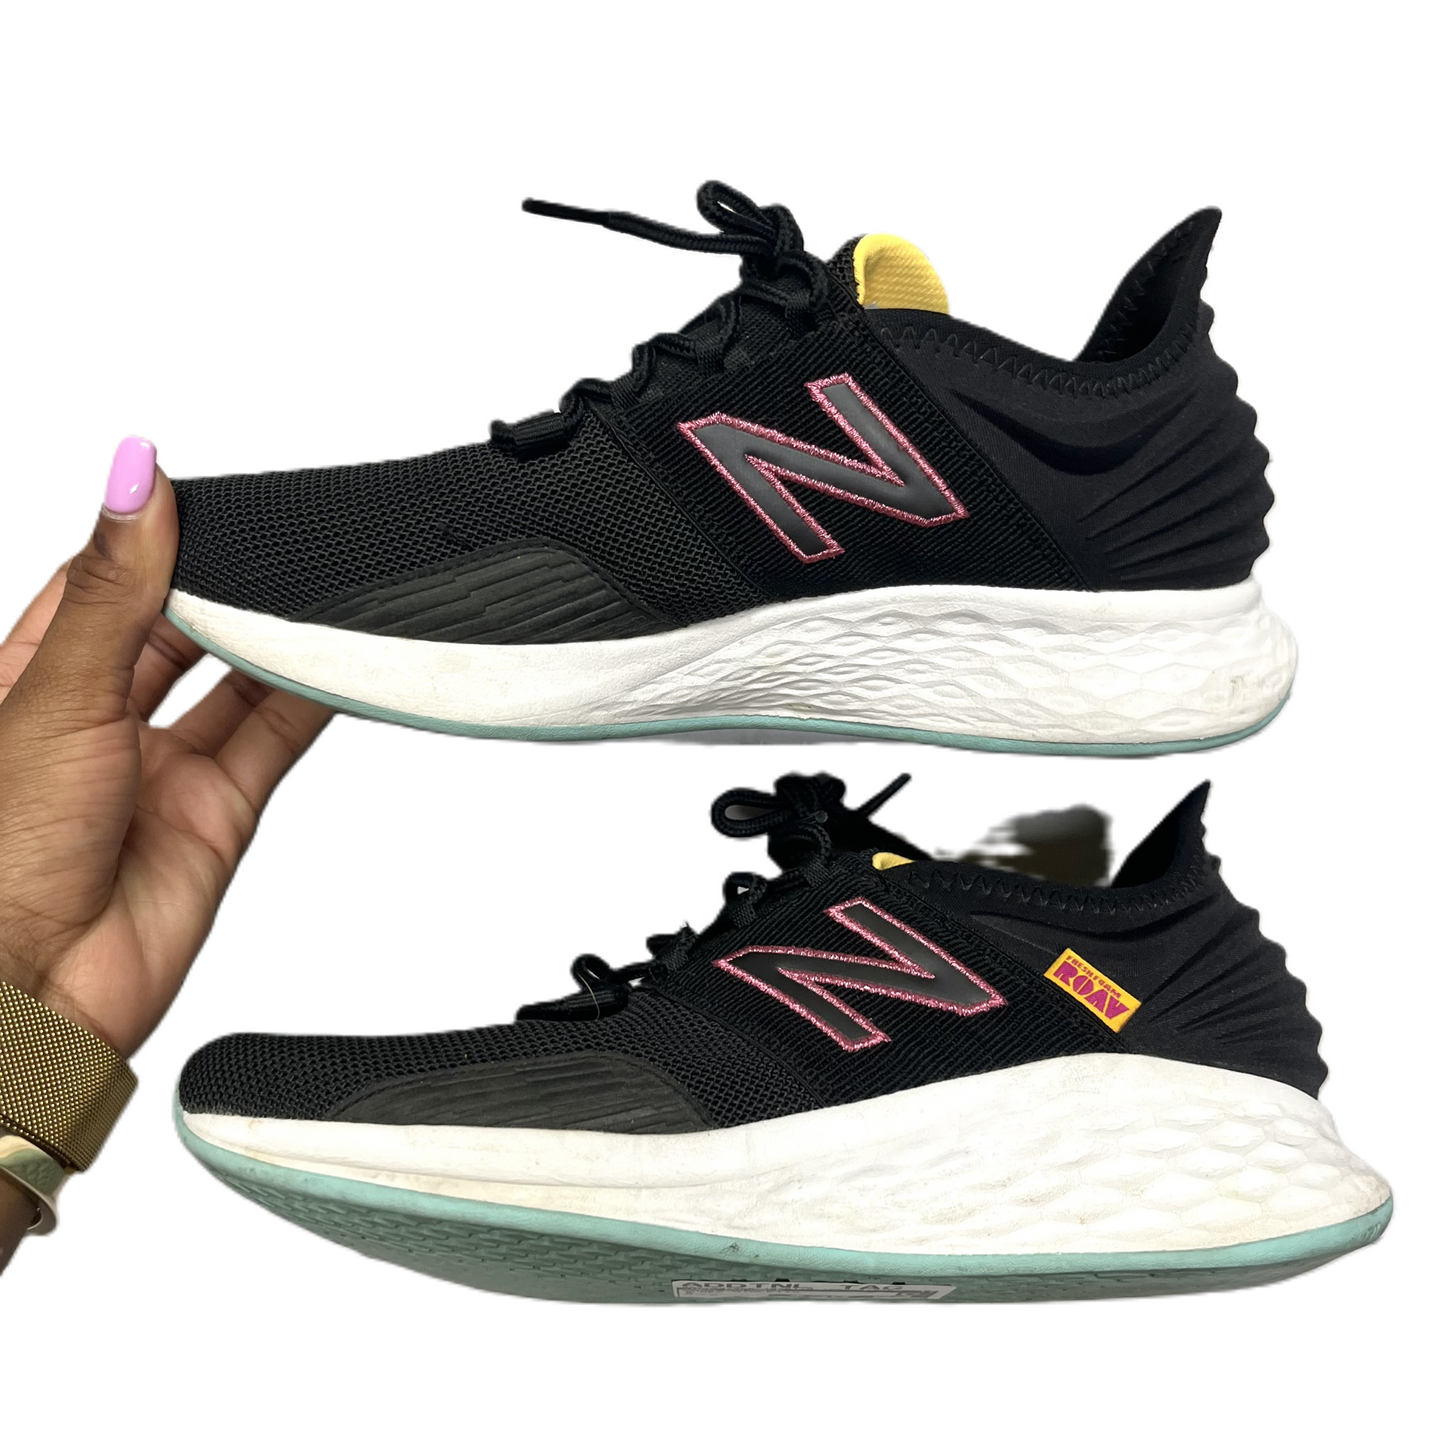 Black Shoes Athletic By New Balance, Size: 8